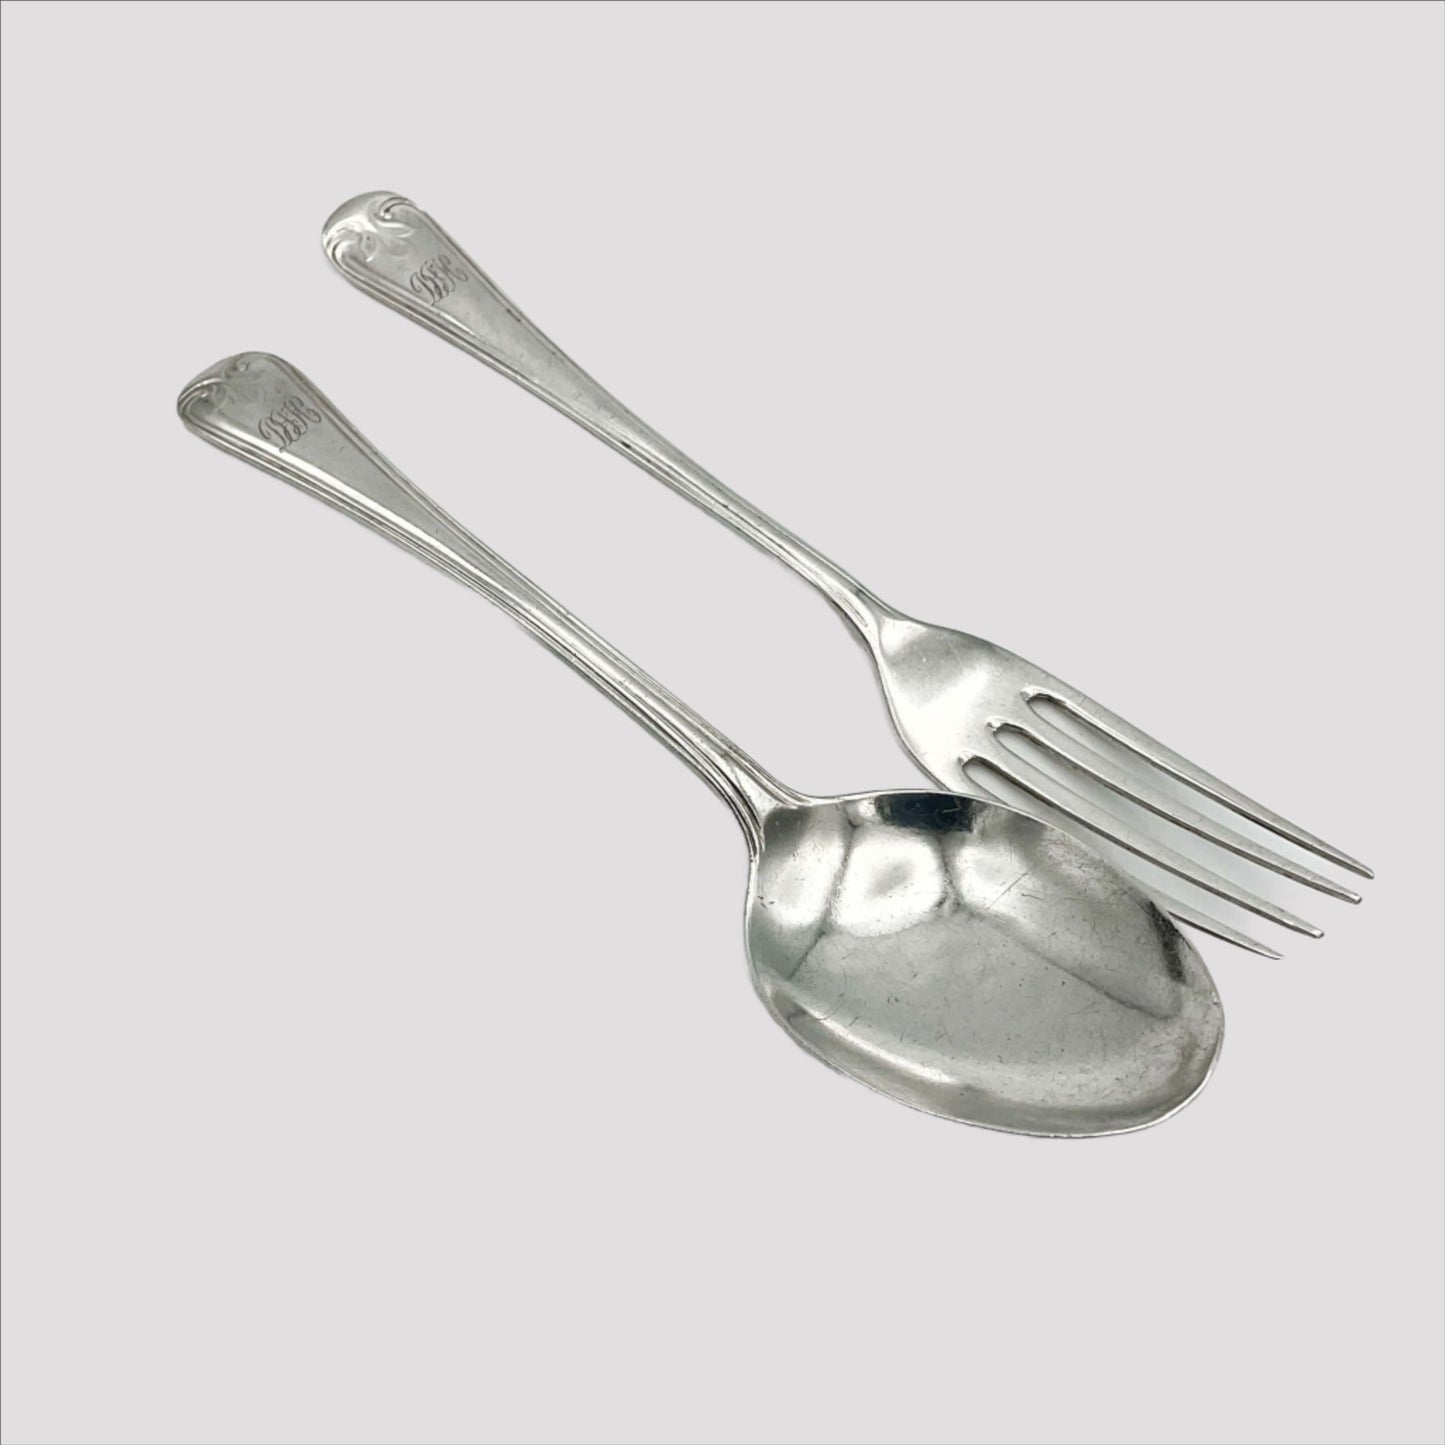 A matching silver spoon and fork sitting on a white background